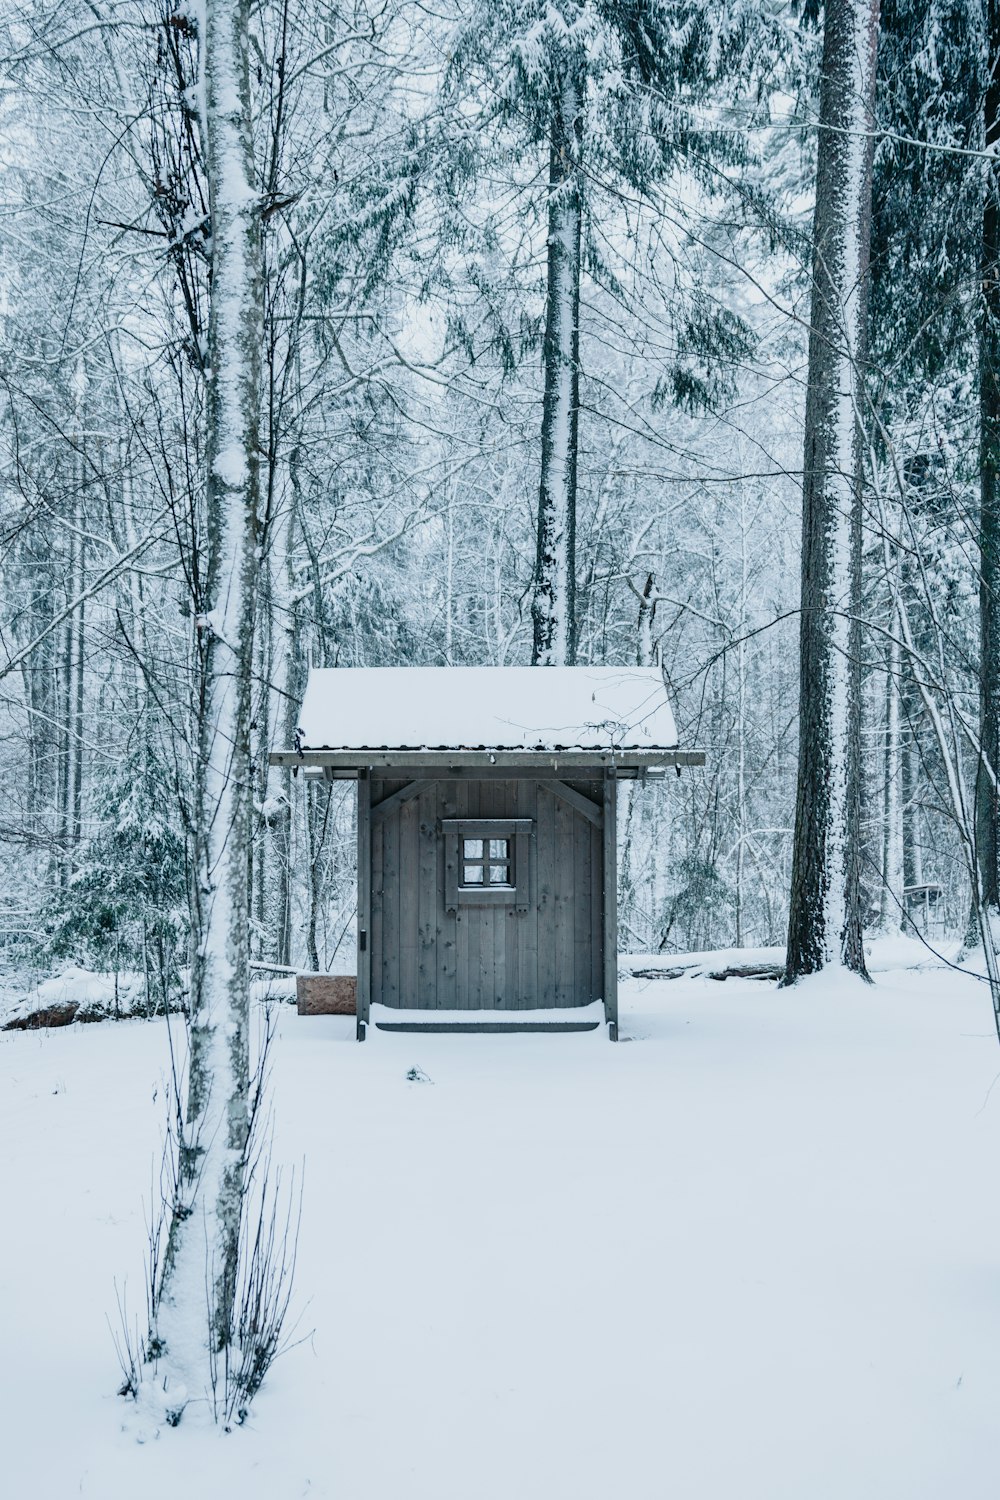 brown wooden house in the middle of snow covered ground